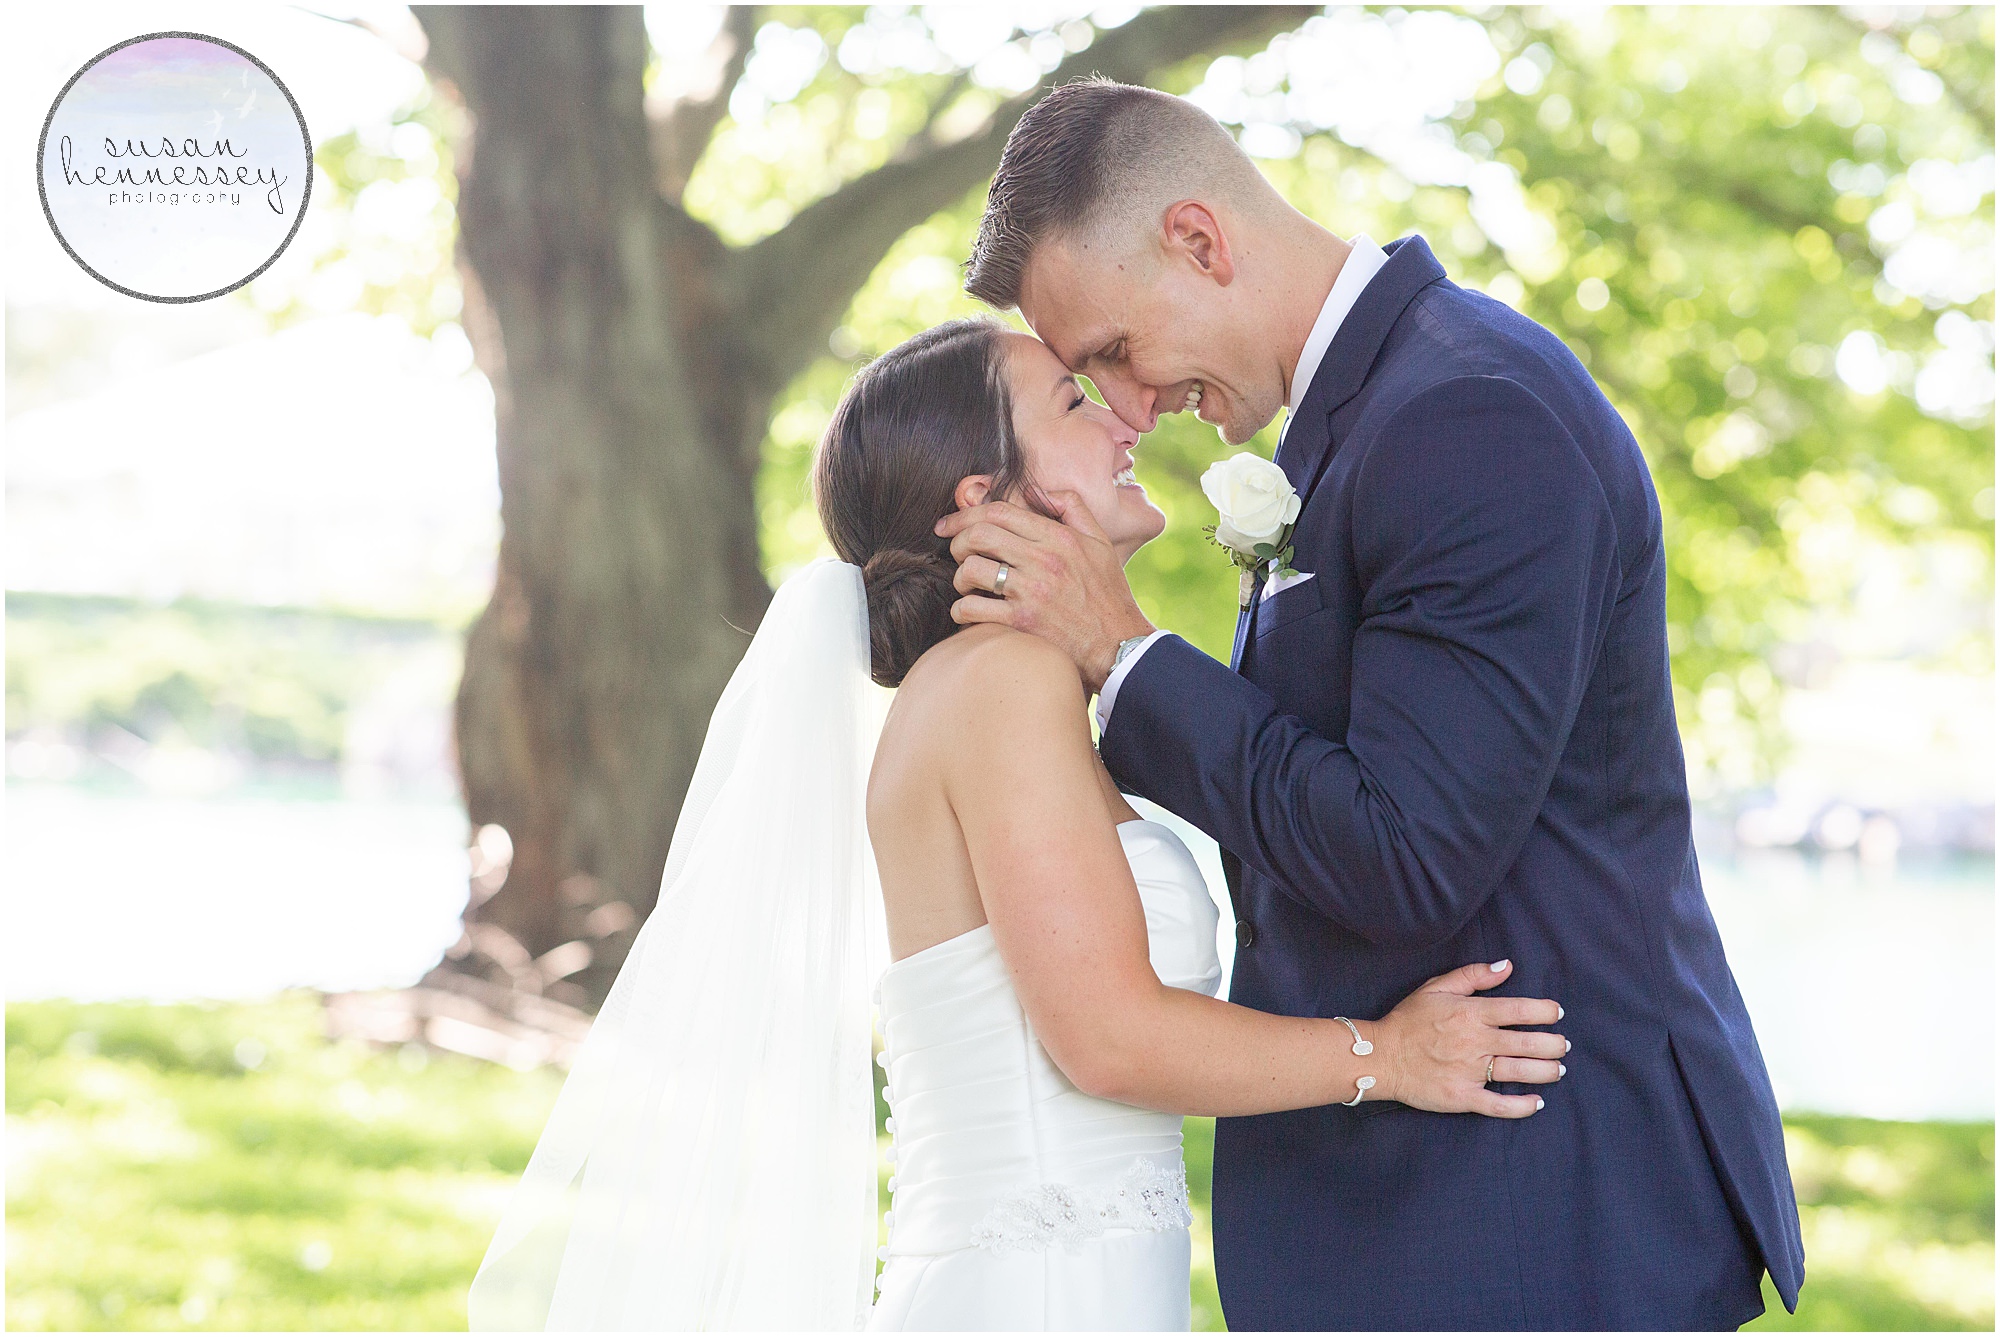 Romantic lake wedding in central New Jersey